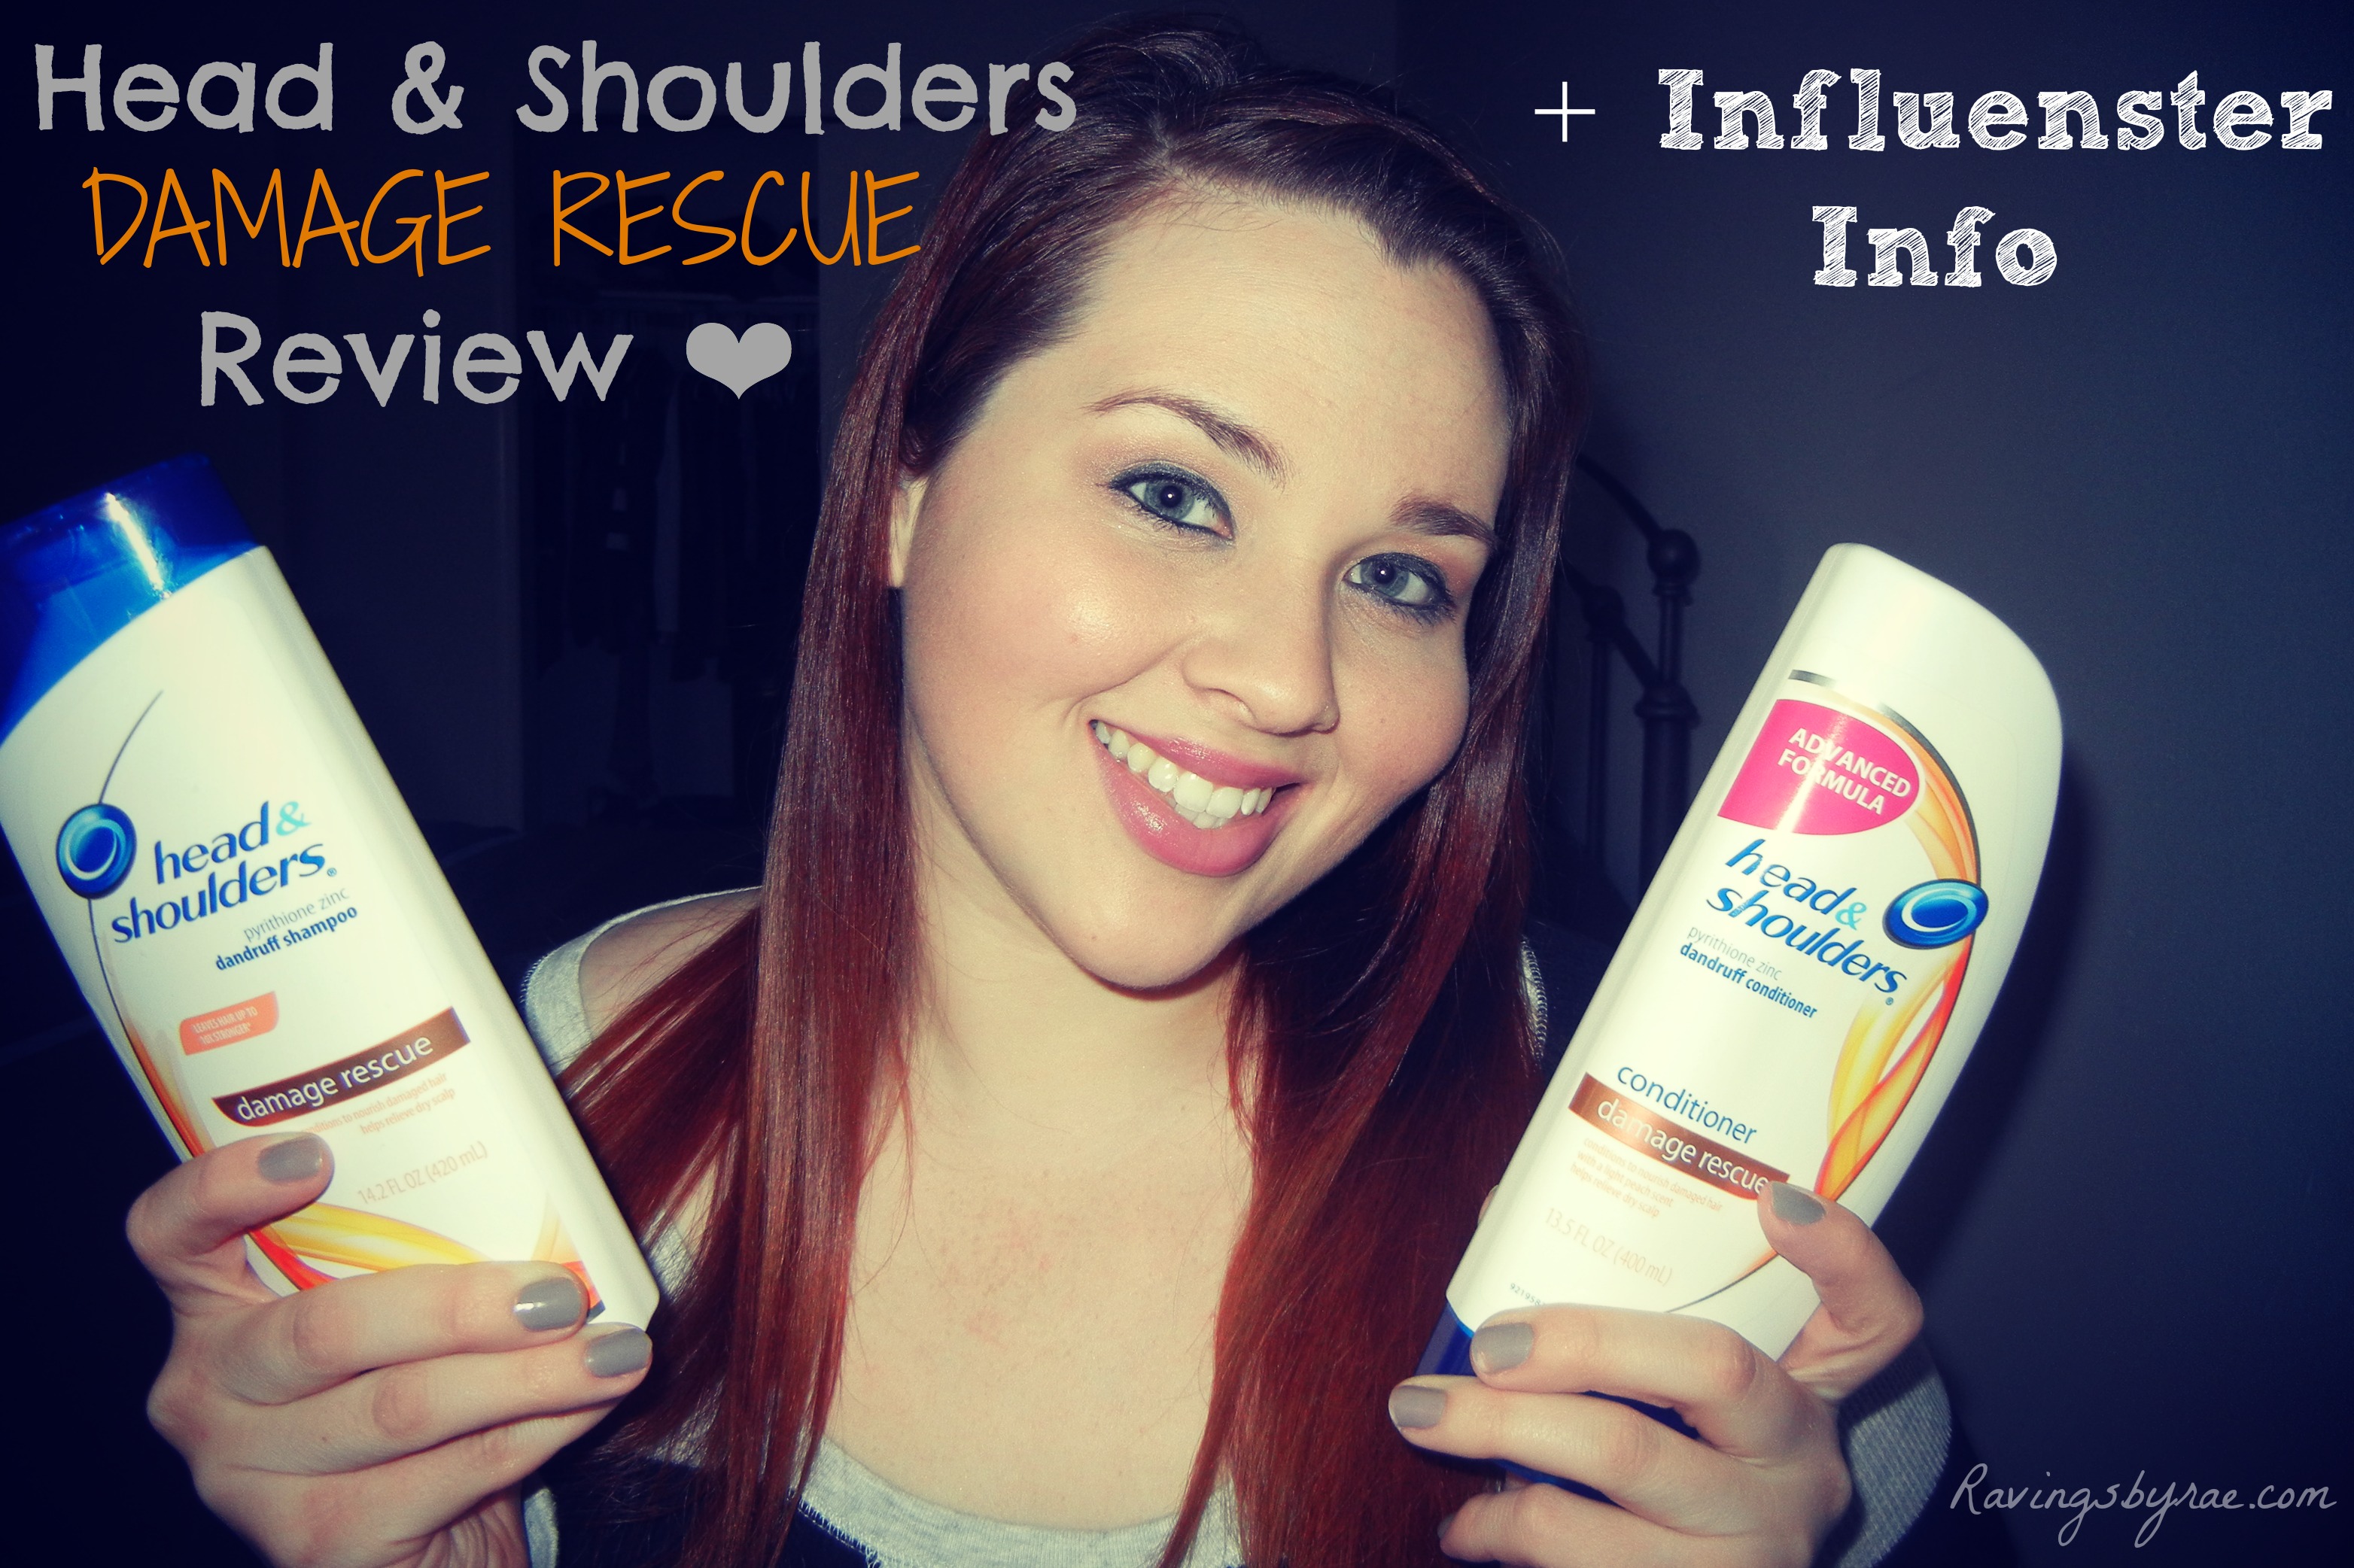 head-and-shoulders-damage-rescue-review-influenster-info-sarah-rae